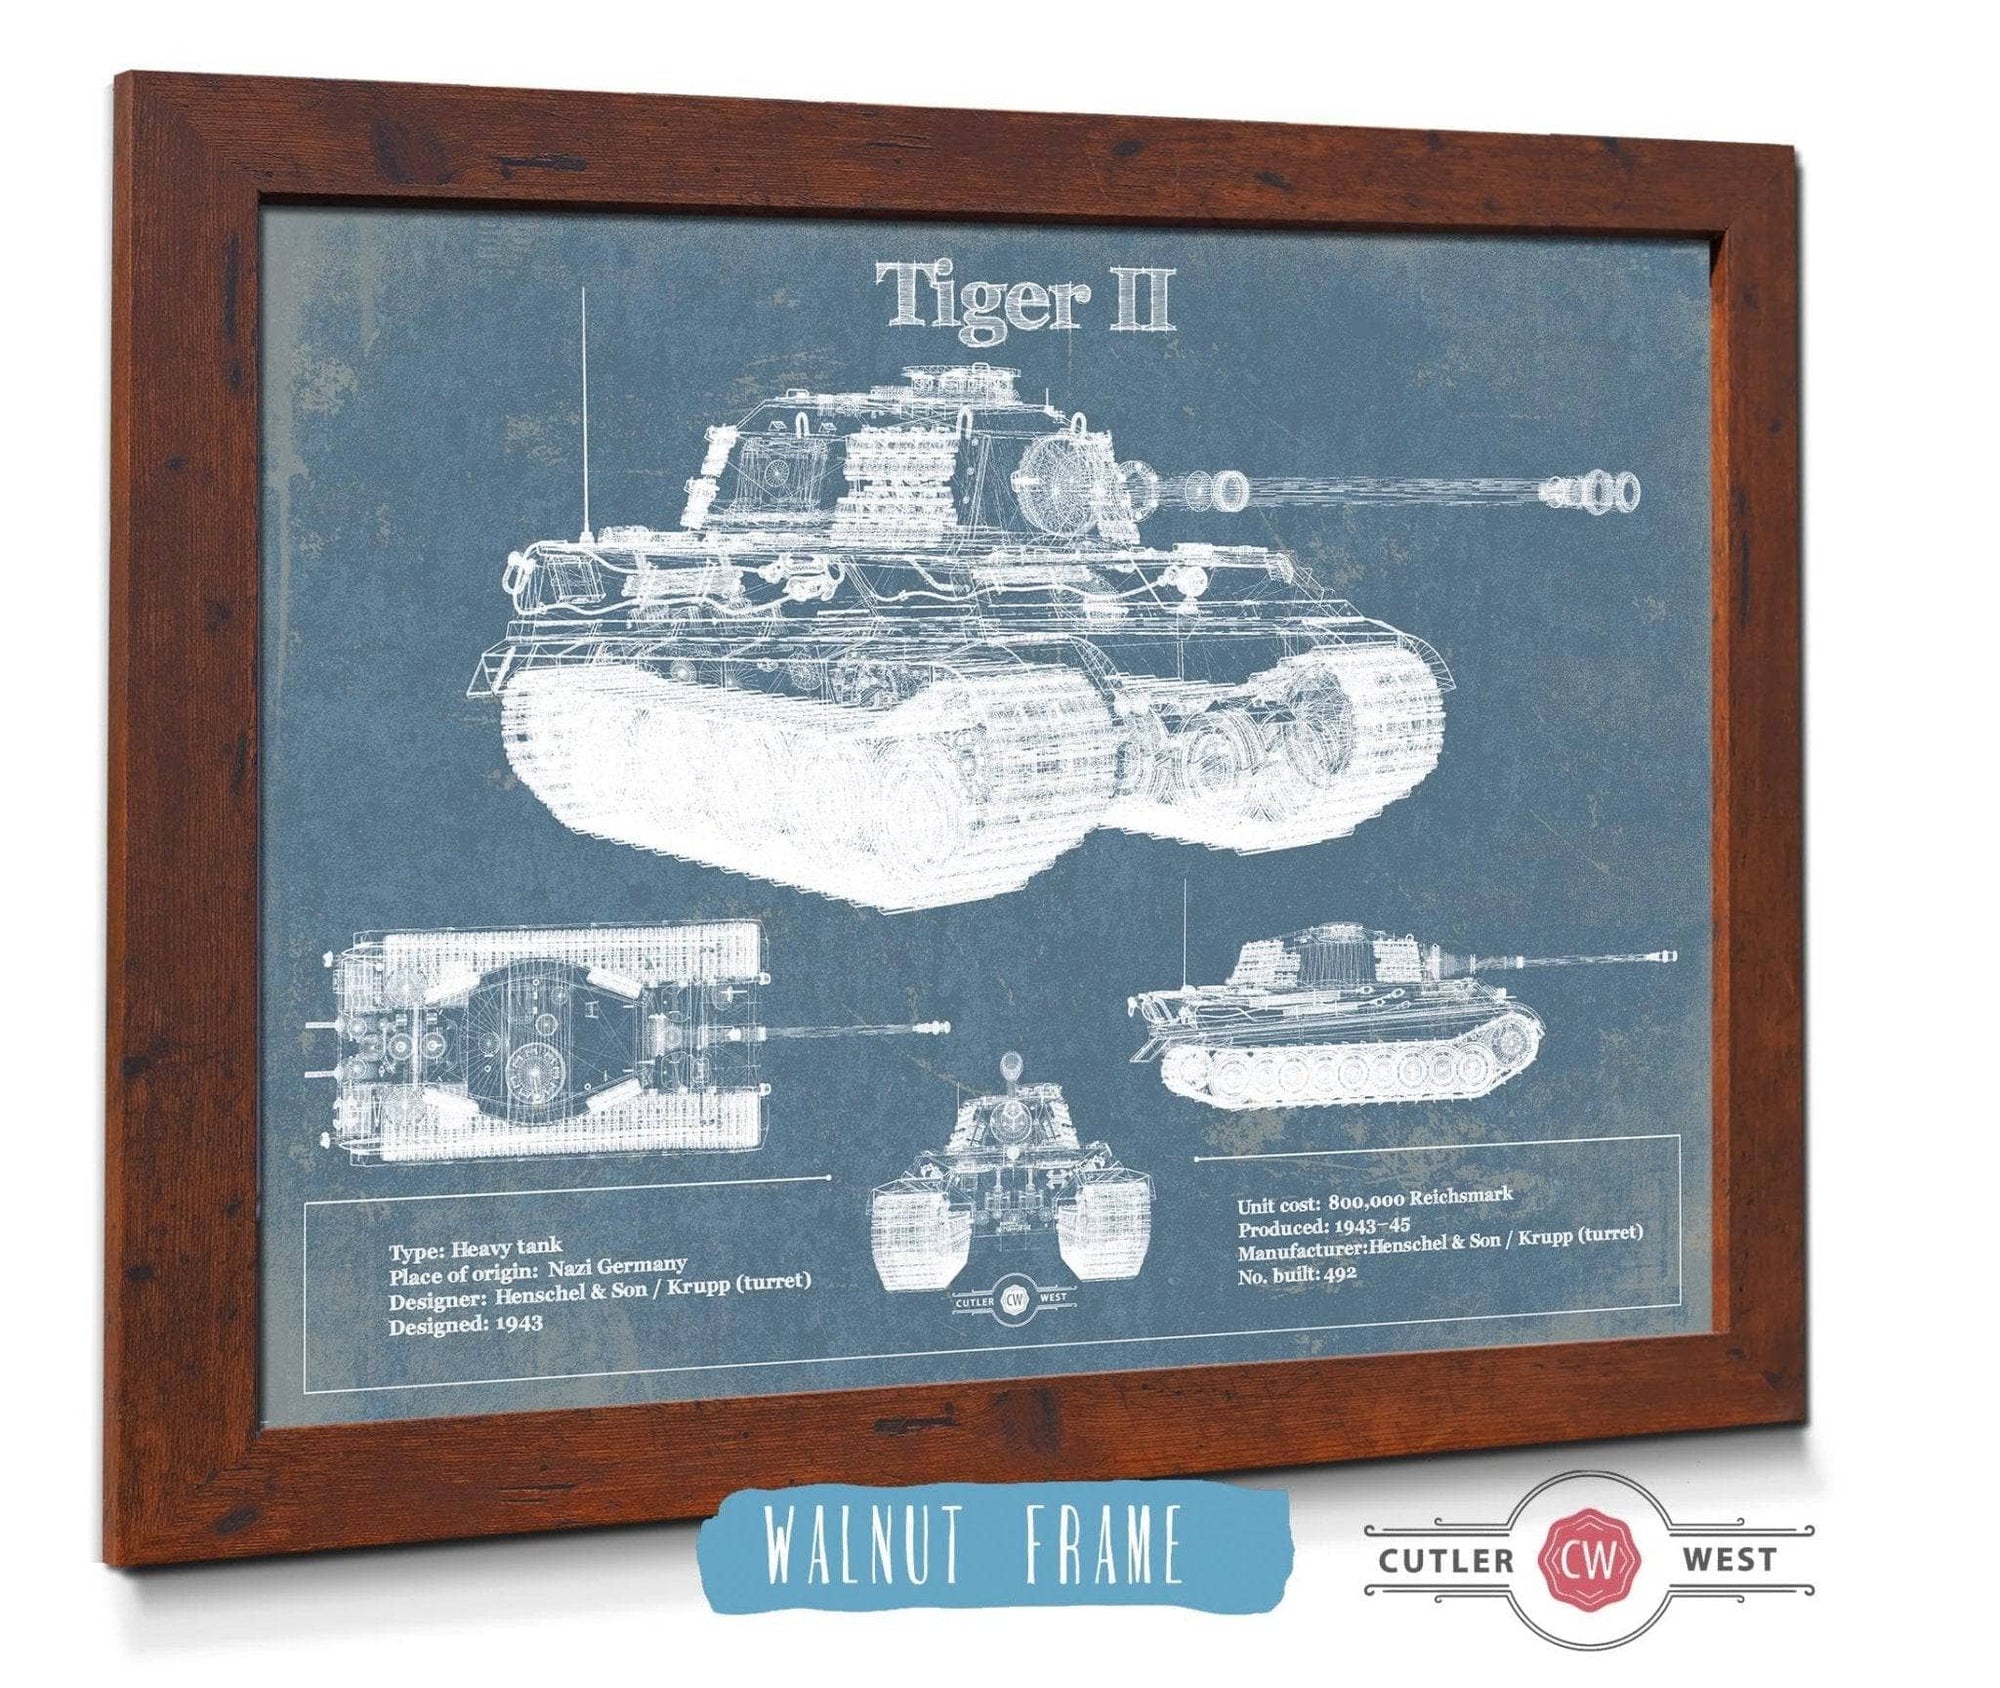 Cutler West Military Weapons Collection 14" x 11" / Walnut Frame Tiger II Vintage German Tank Military Print 845000232_24667